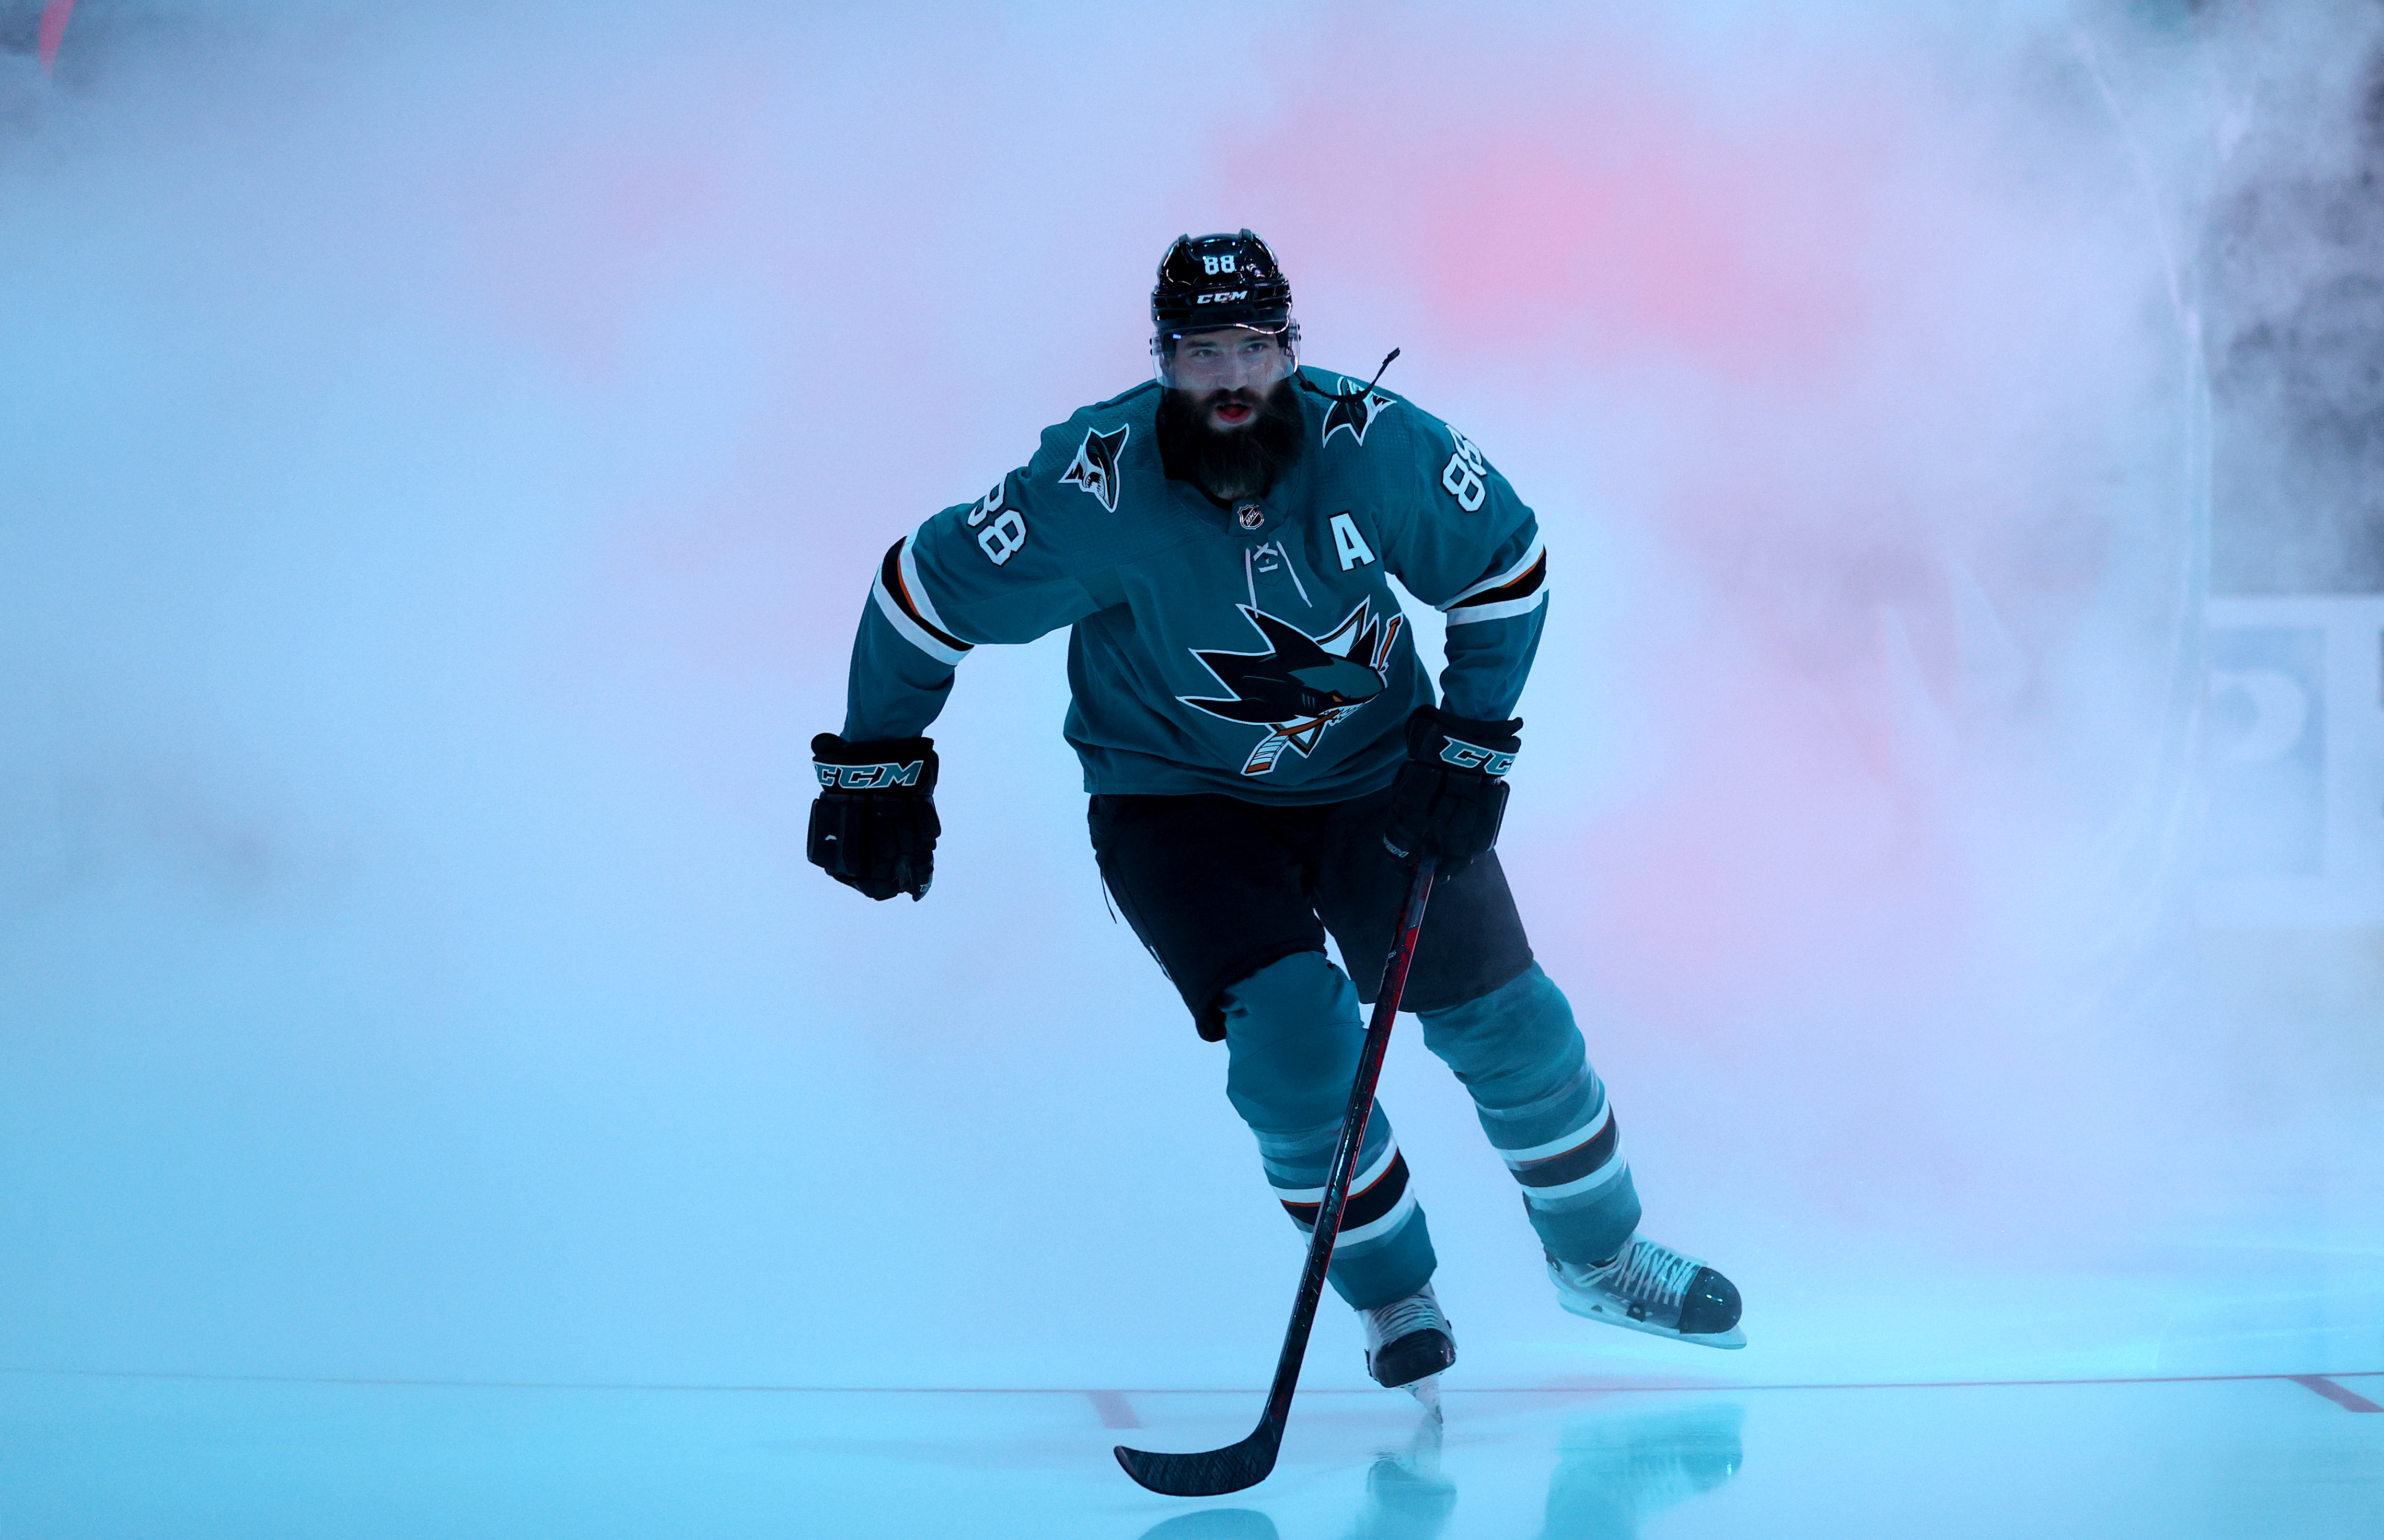 Brent Burns #88 of the San Jose Sharks skates on to the ice for their game against the Anaheim Ducks at SAP Center on October 04, 2021 in San Jose, California.